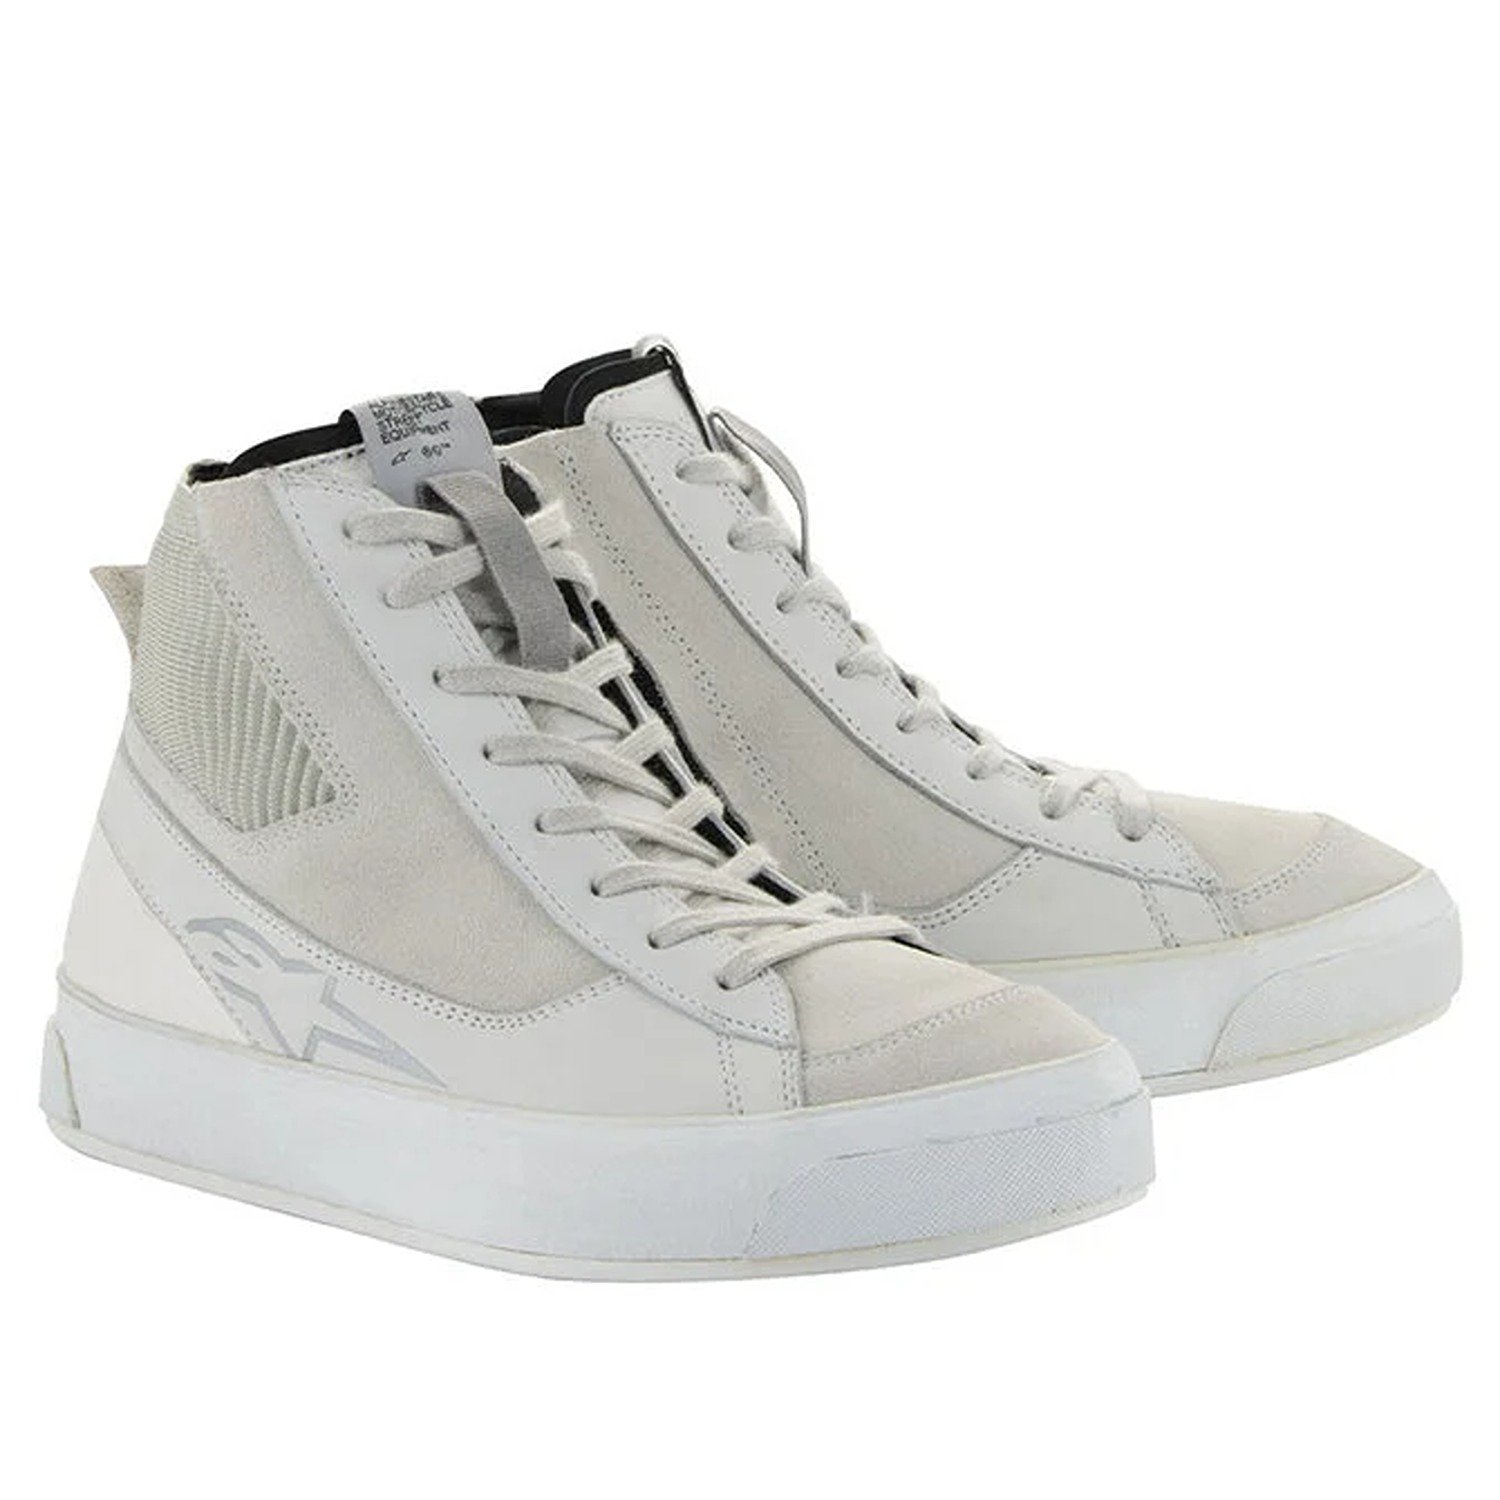 Image of Alpinestars Stated Shoes White Cool Gray Taille US 105